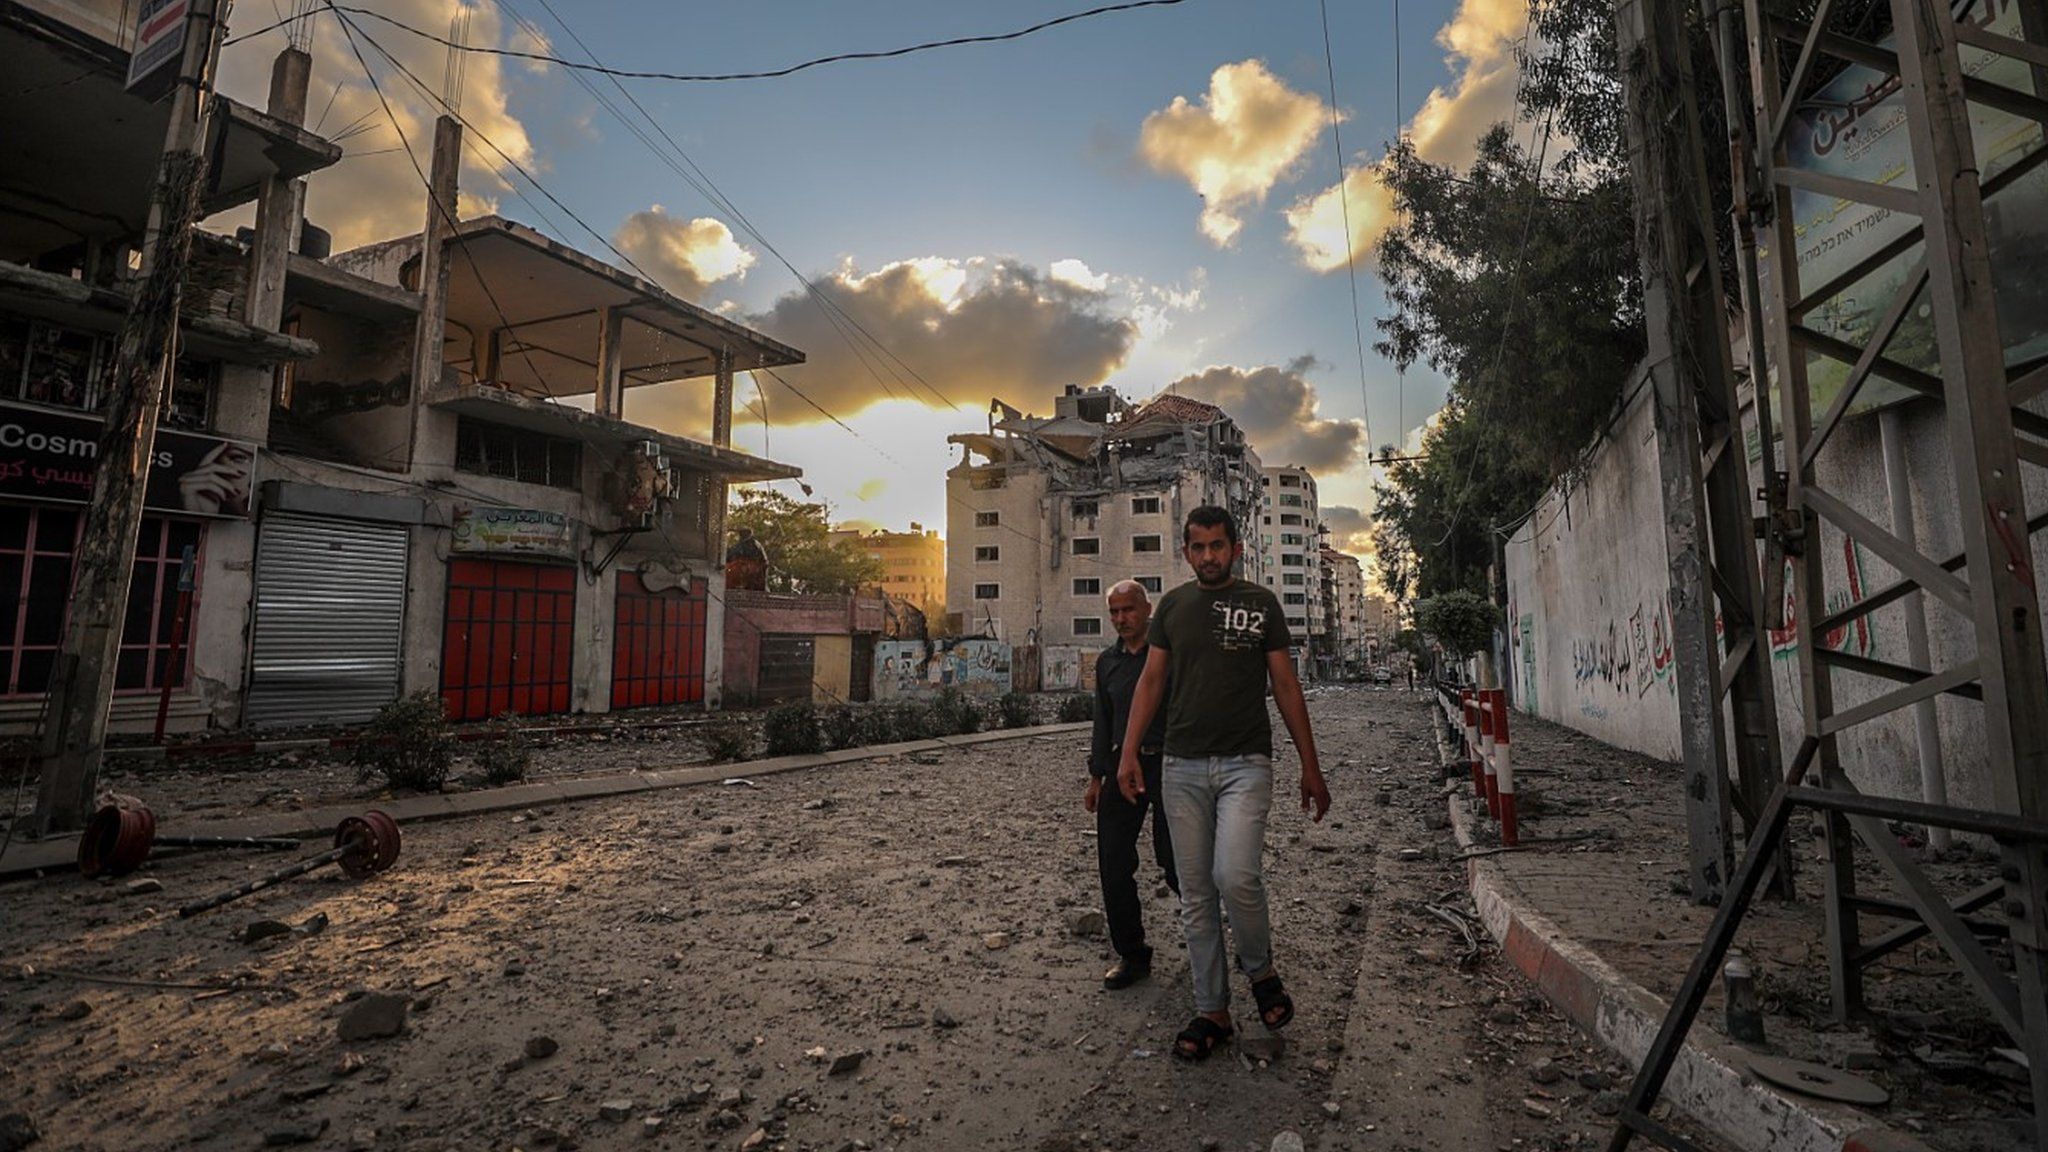 Palestinians walk past a destroyed building in Gaza City on 17 May 2021